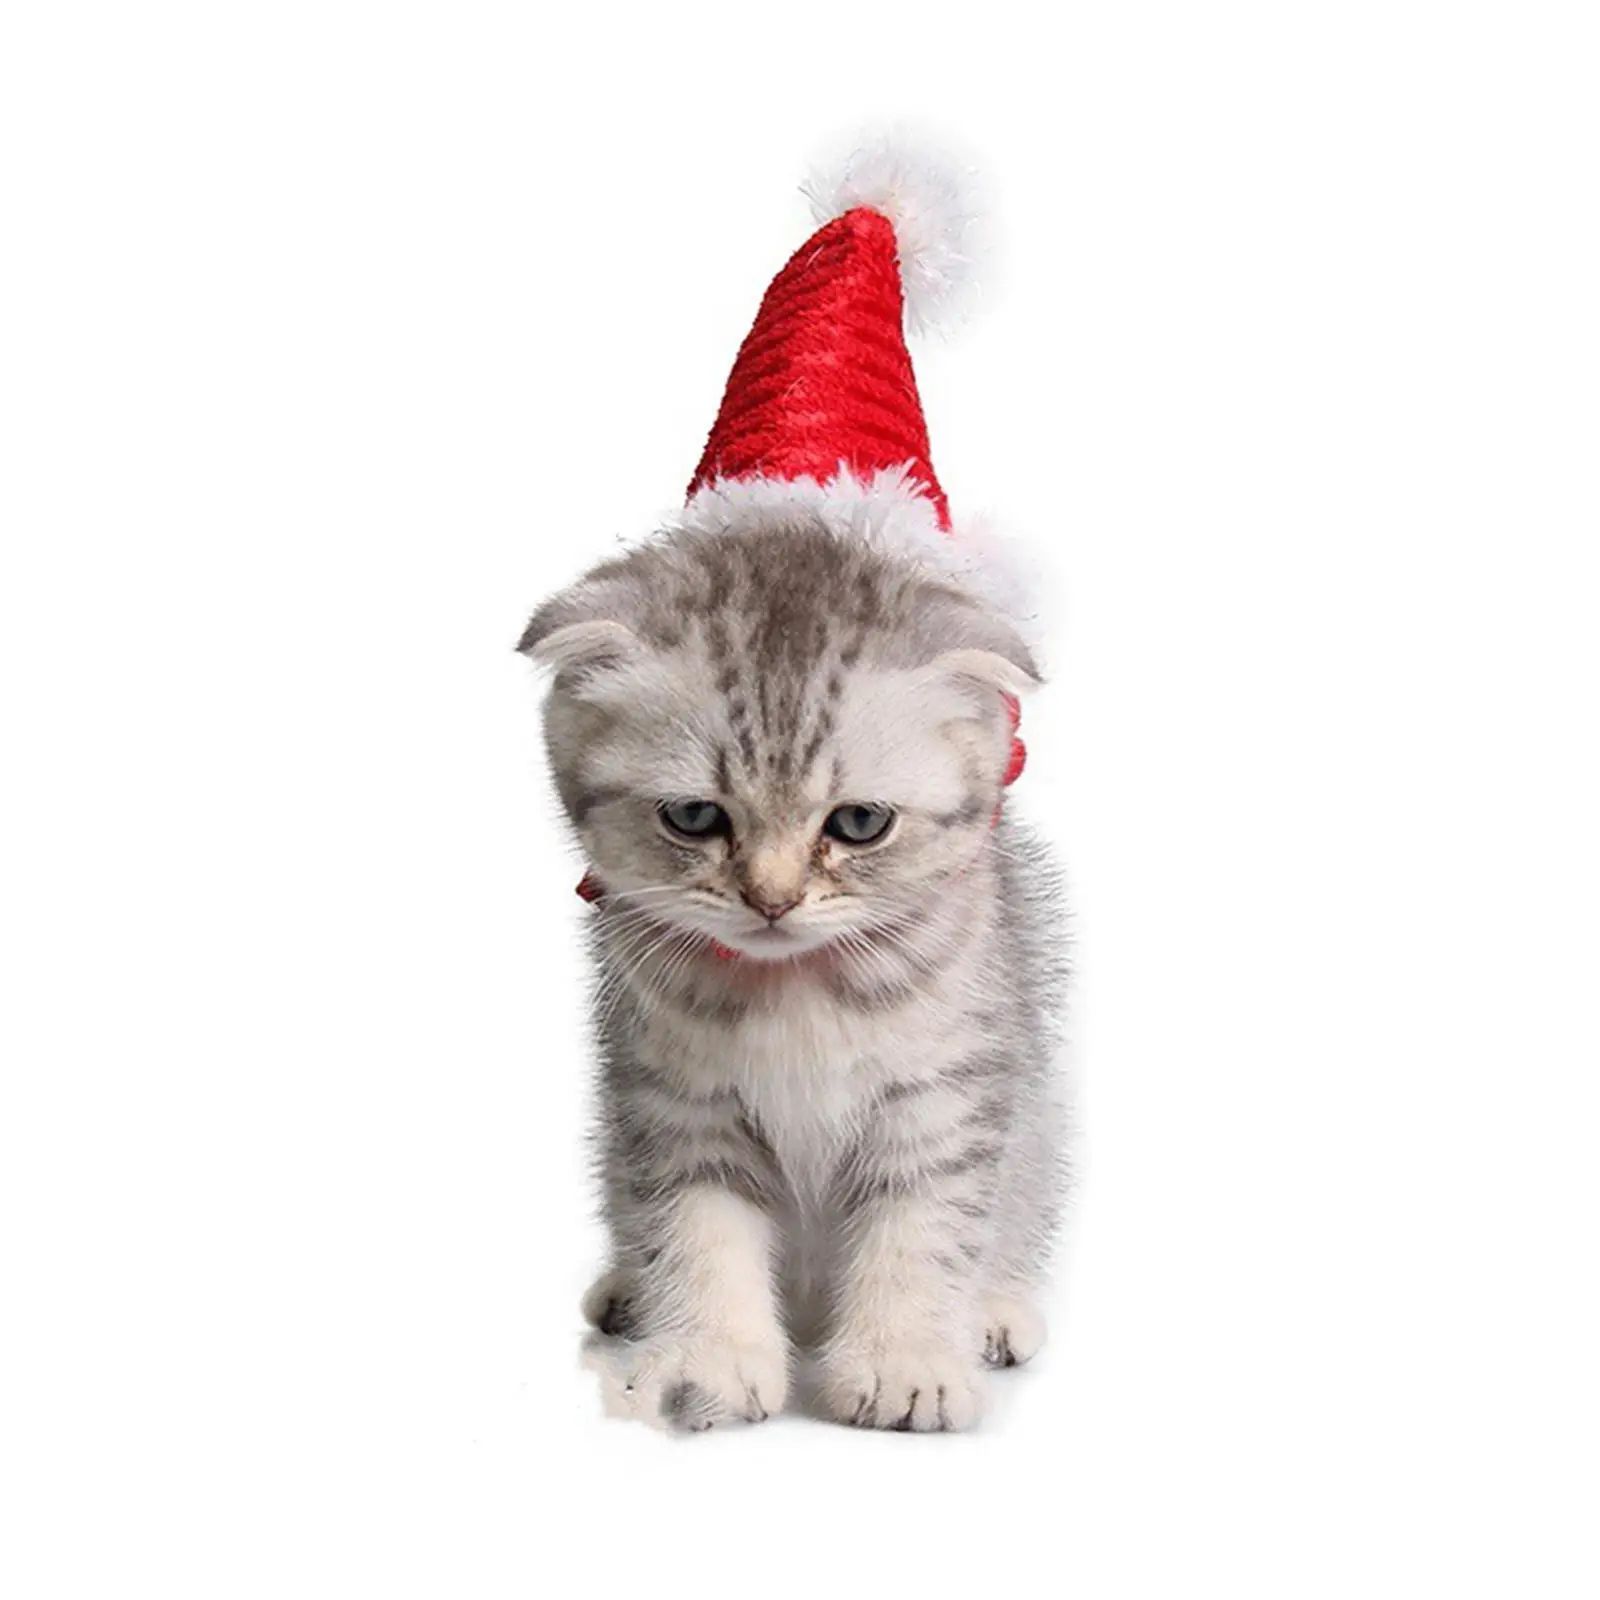 Cute Cat Hamster Santa Hat Cap Pet Christmas Hat Red Color for Bunny Rats Adjustable Under Chin Strap Headwear Xmas Accessory